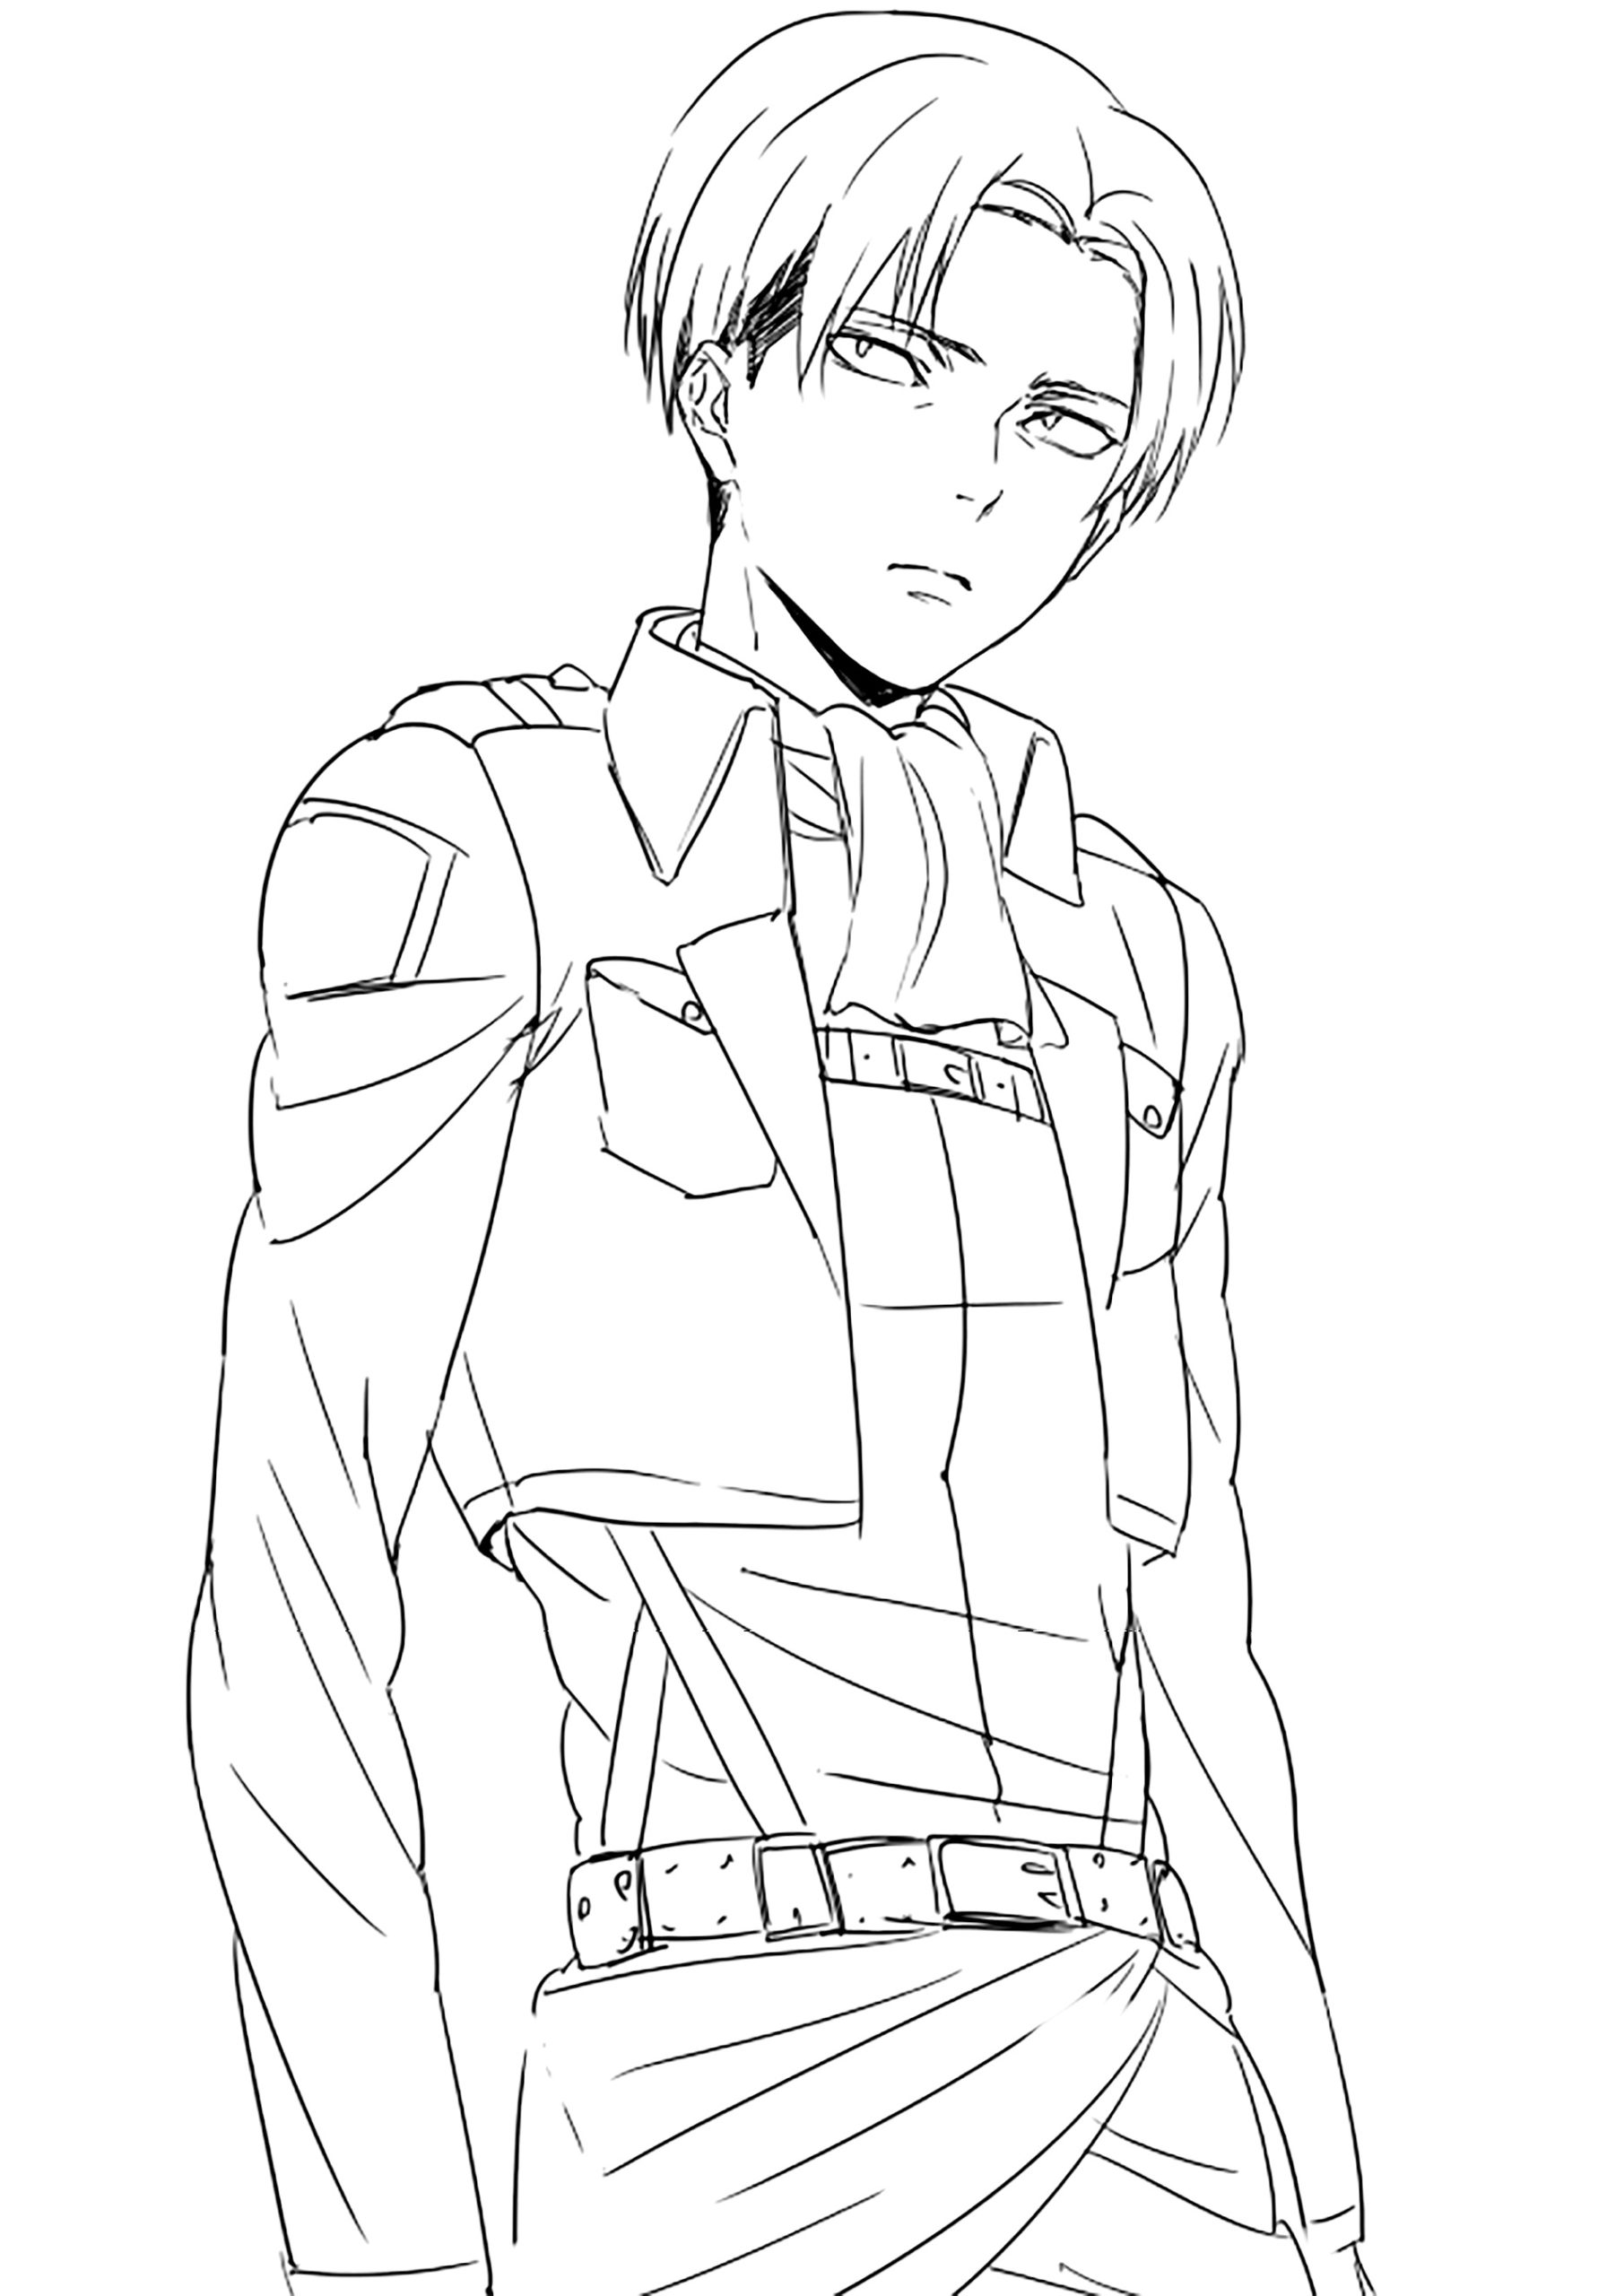 Attack on Titans Levi Coloring Page